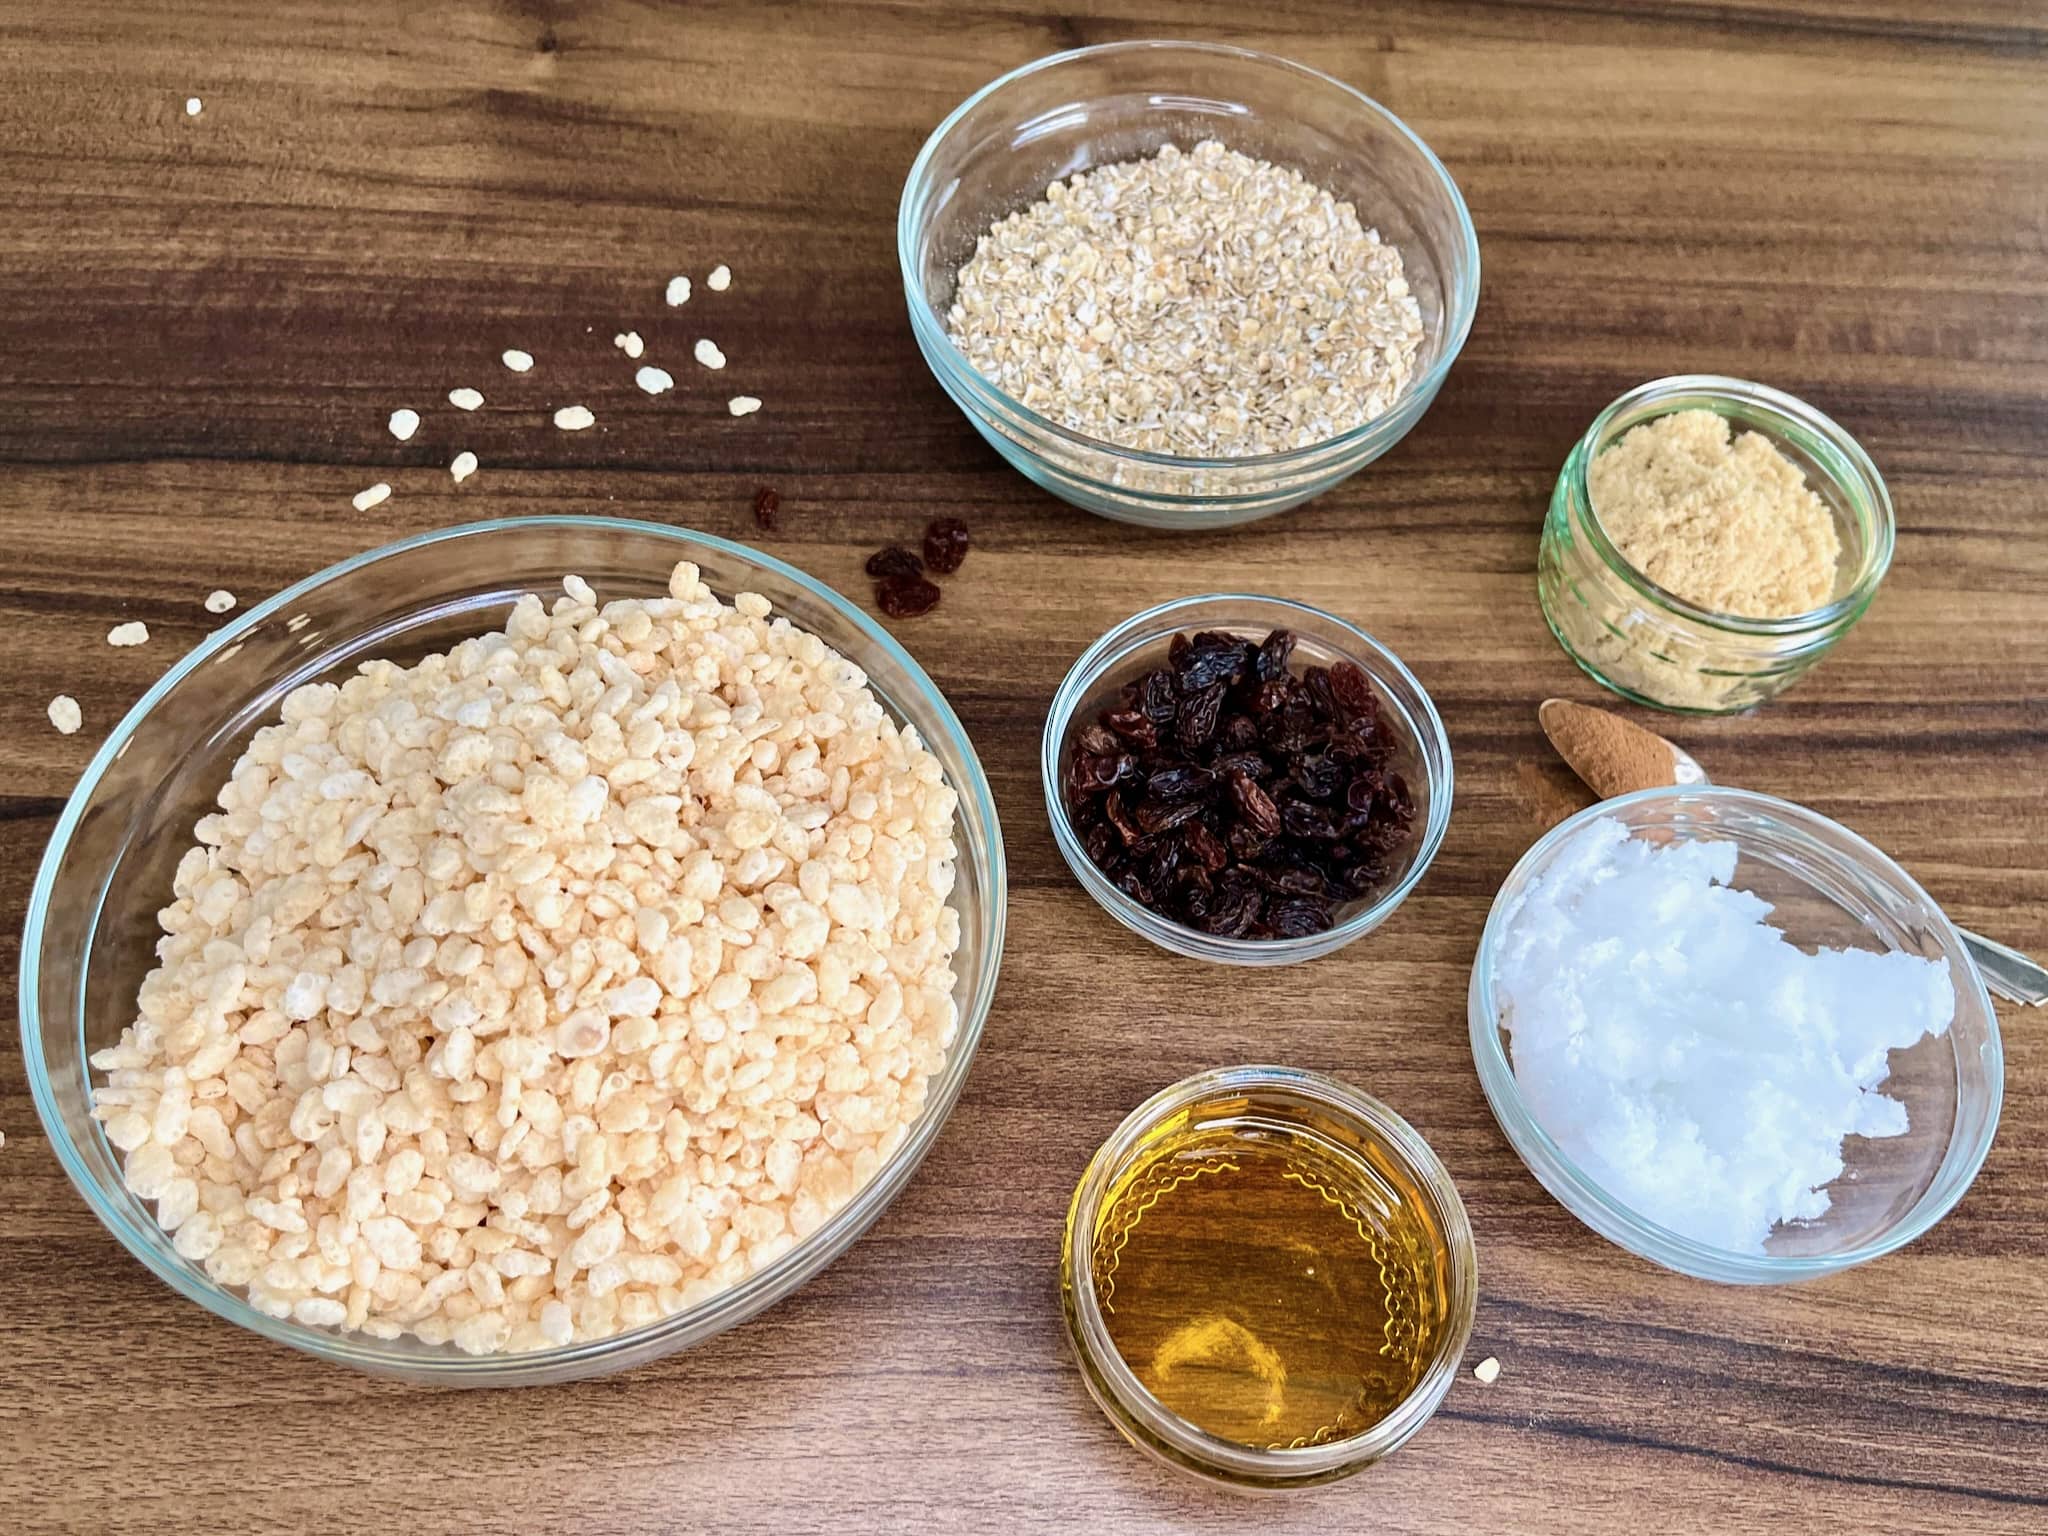 All your ingredients are gathered and ready to go for these No-Bake Rice Krispie Bars with Oats